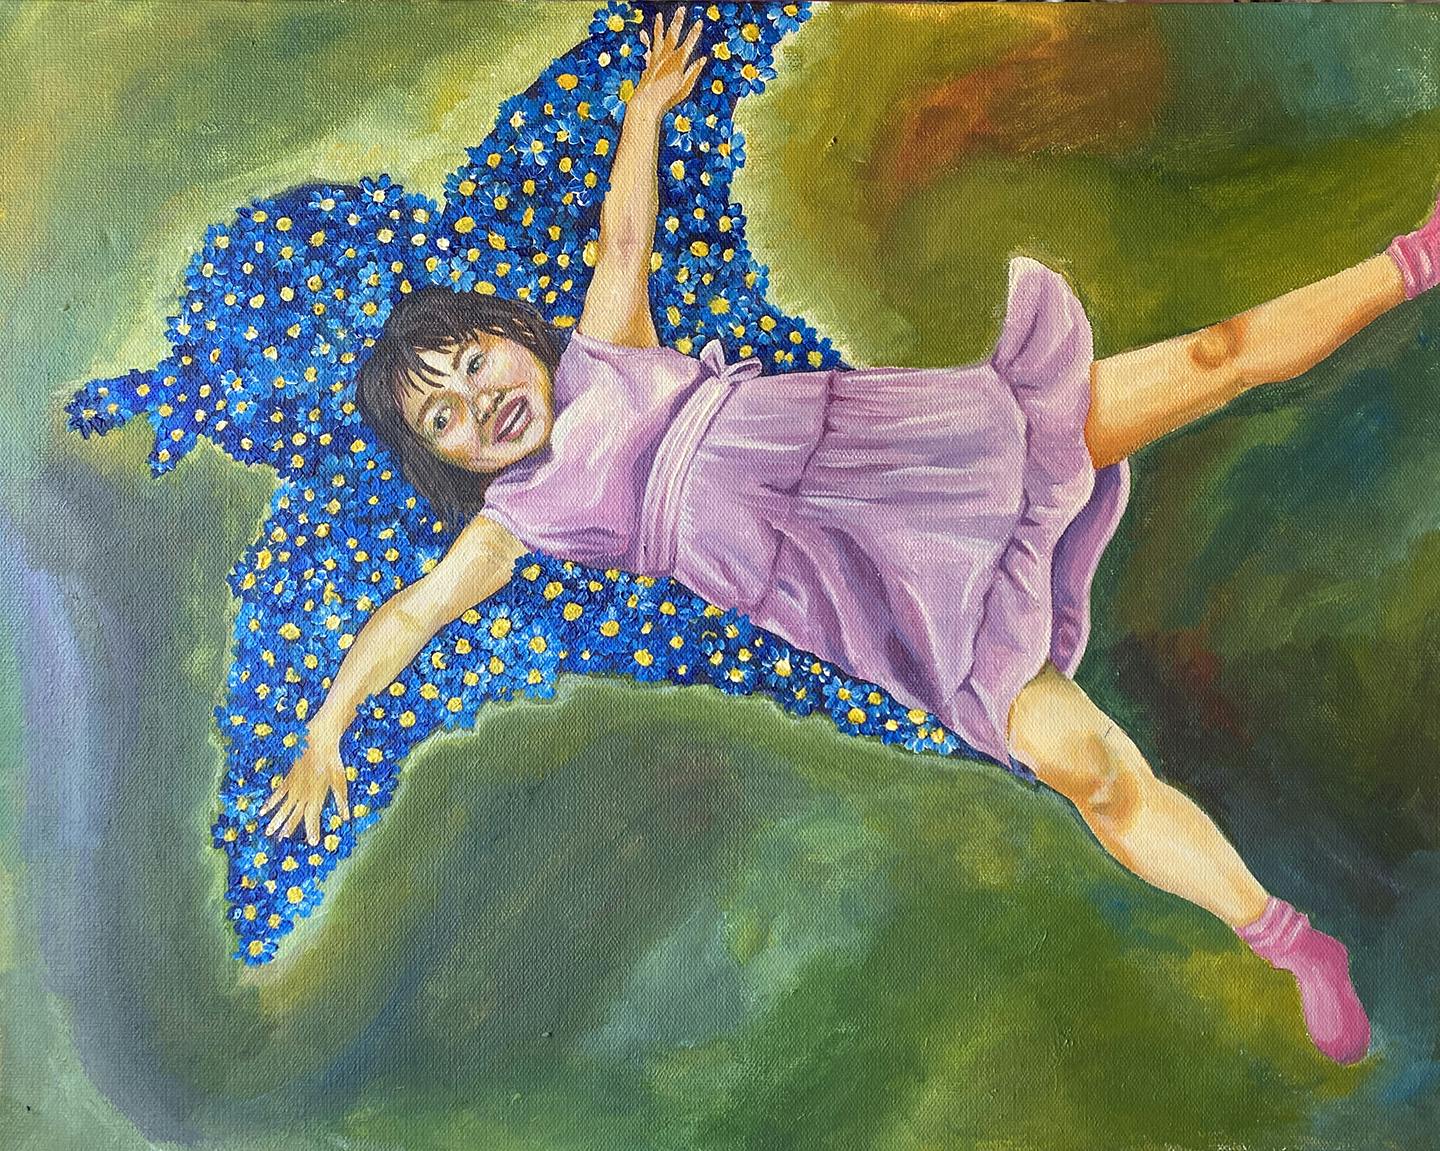 Painting of a smiling child lying on a bed of stars